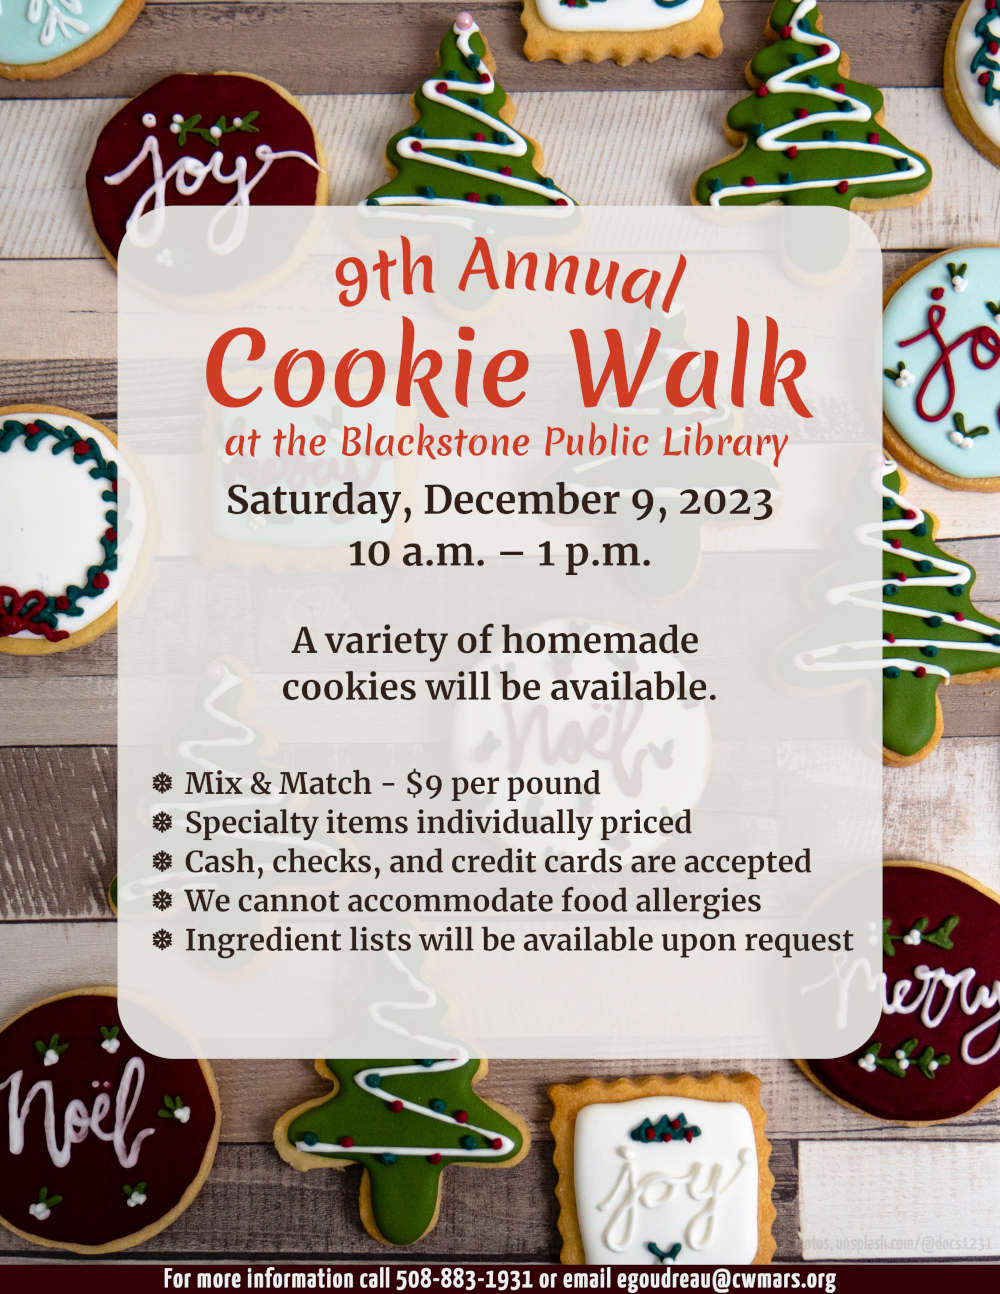 Flyer text is over a photograph of colorful holiday cookies spread evenly over a wooden cutting board with varying tones of wood stripes.  The 9th Annual Cookie Walk at the Blackstone Public Library Saturday, December 9, 2023, 10 a.m. – 1 p.m.  A variety of homemade cookies will be available. Mix & Match is $9 per pound. Specialty items are individually priced. Cash, checks, and credit cards are accepted. We cannot accommodate food allergies, but ingredient lists will be available upon request.   For more information call 508-883-1931 or email egoudreau@cwmars.org.